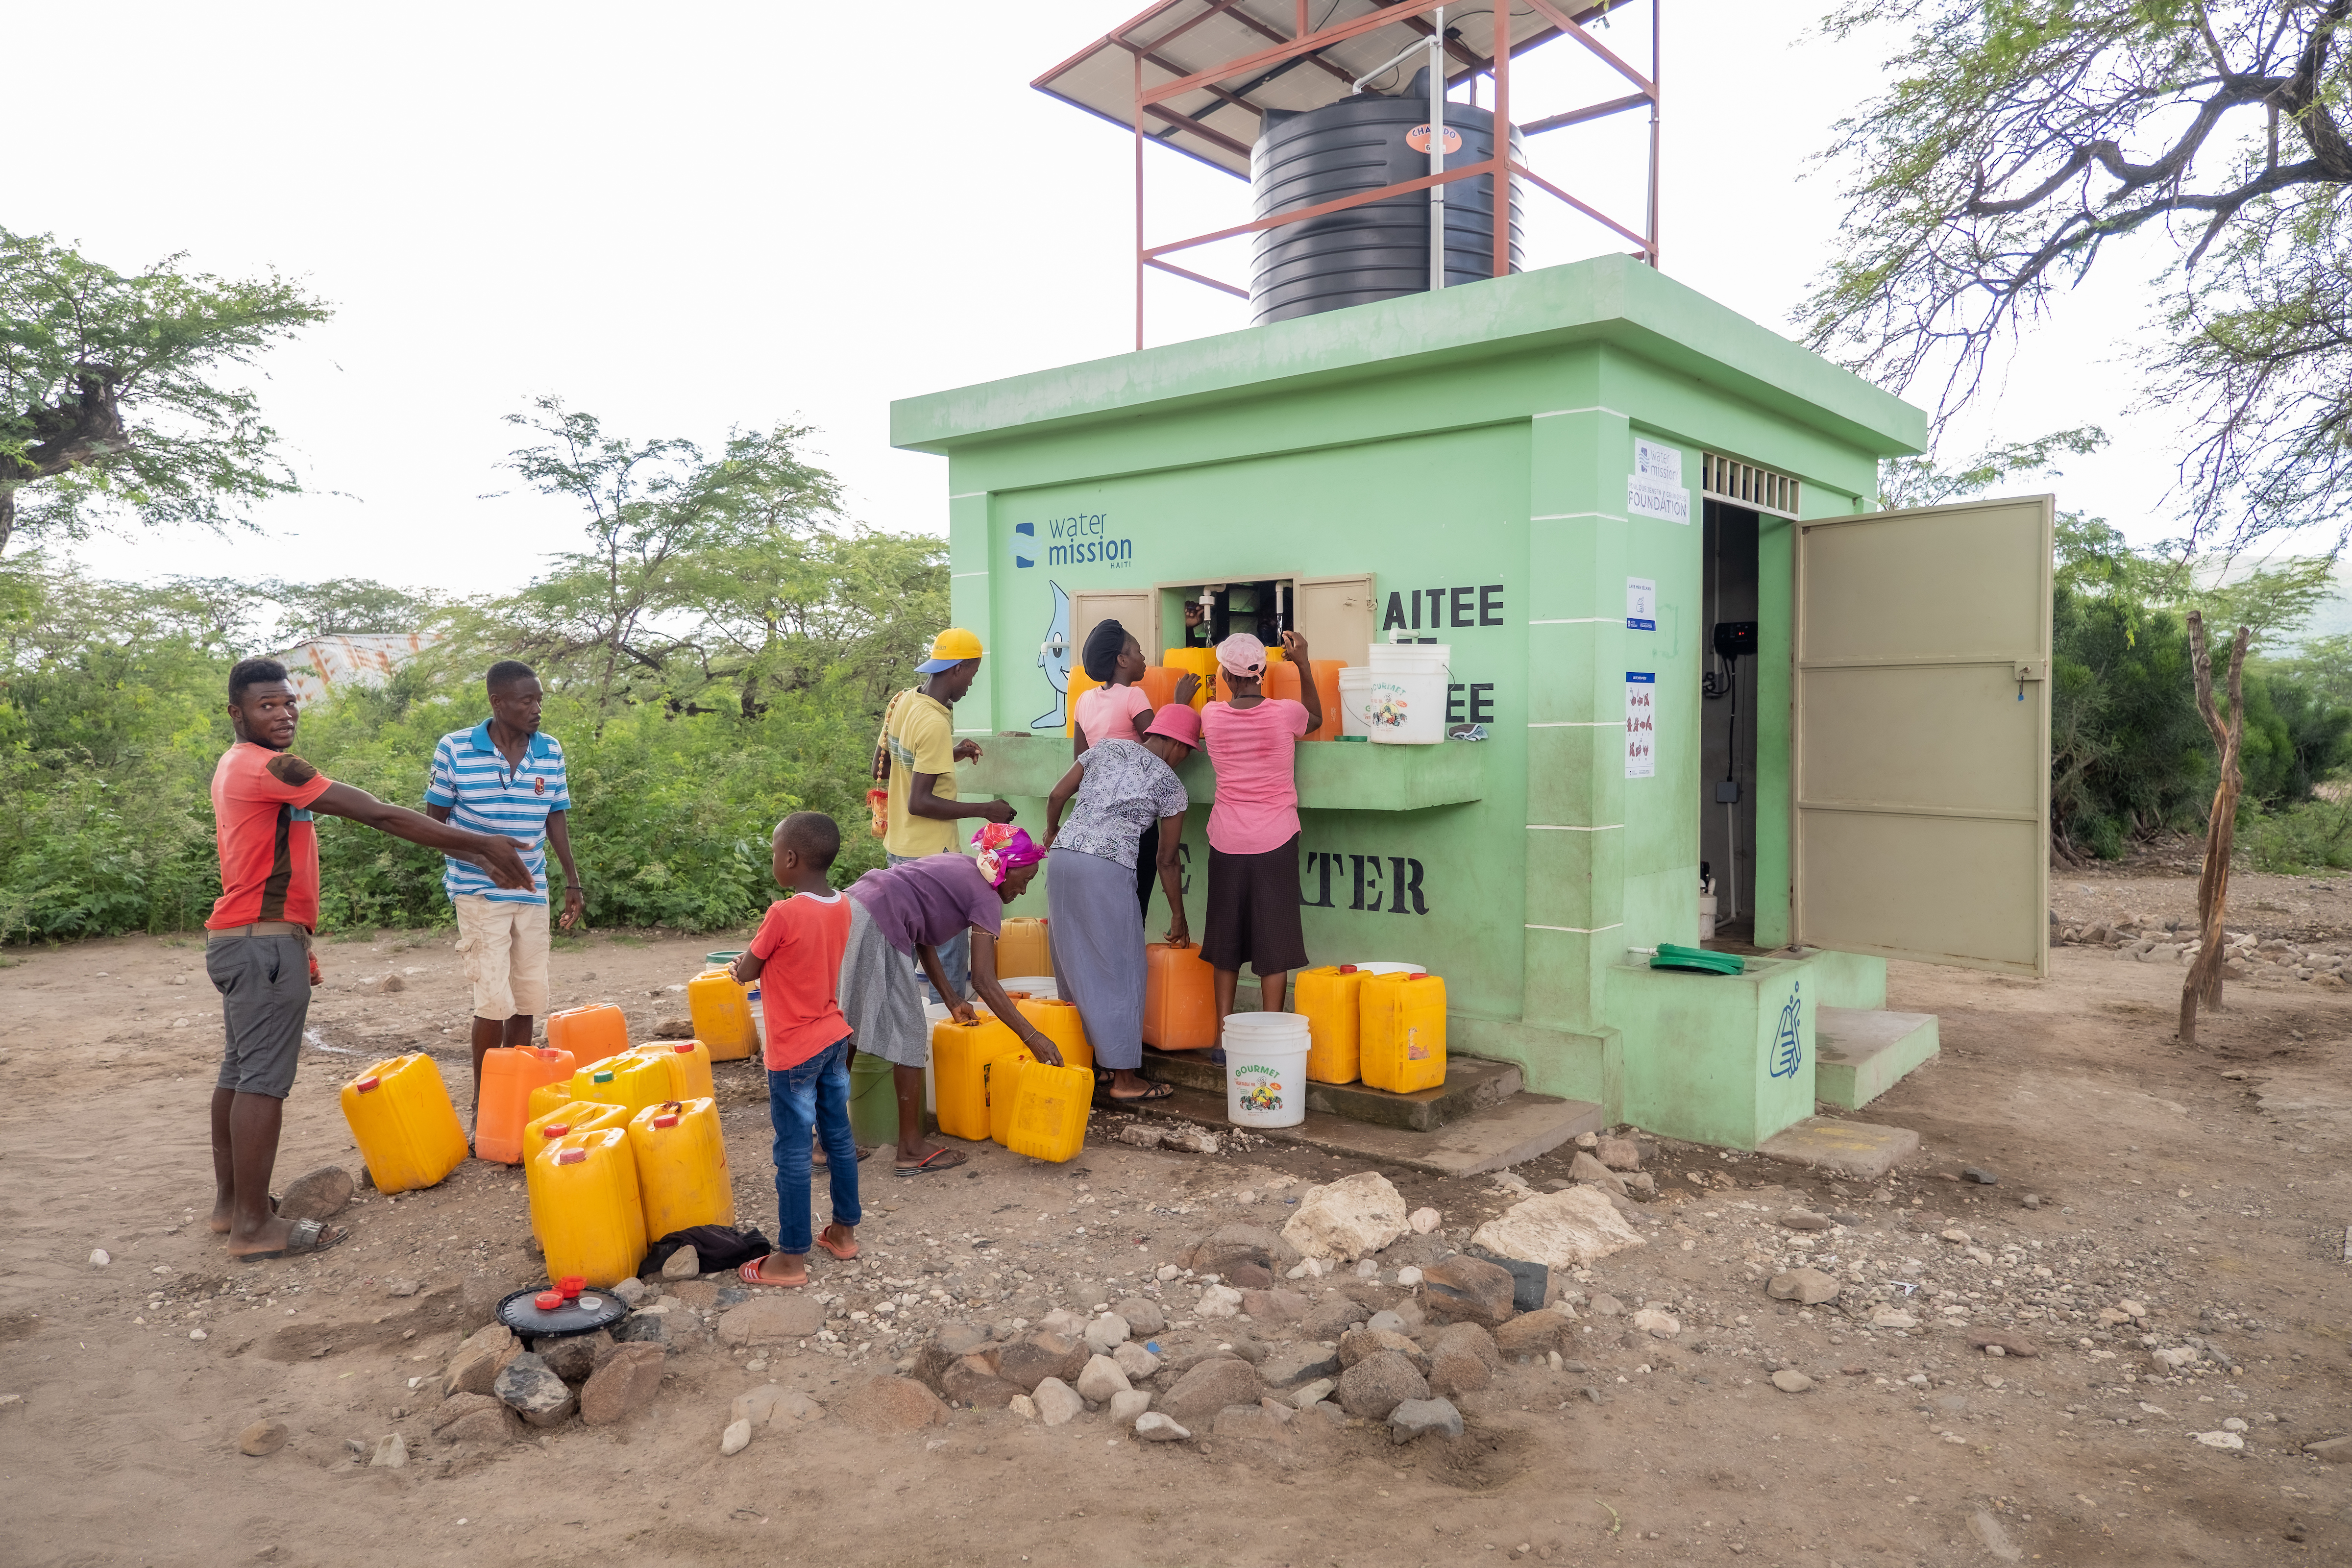 In the wake of 2016’s Hurricane Matthew, Water Mission constructed 40 water treatment systems to bring clean, safe water to Haiti. Knowing the country rests on a seismic fault, engineers designed the structures to withstand future earthquakes, such as the 7.2-magnitude quake that hit late this summer. Of the 40 projects, 38 remain functional.